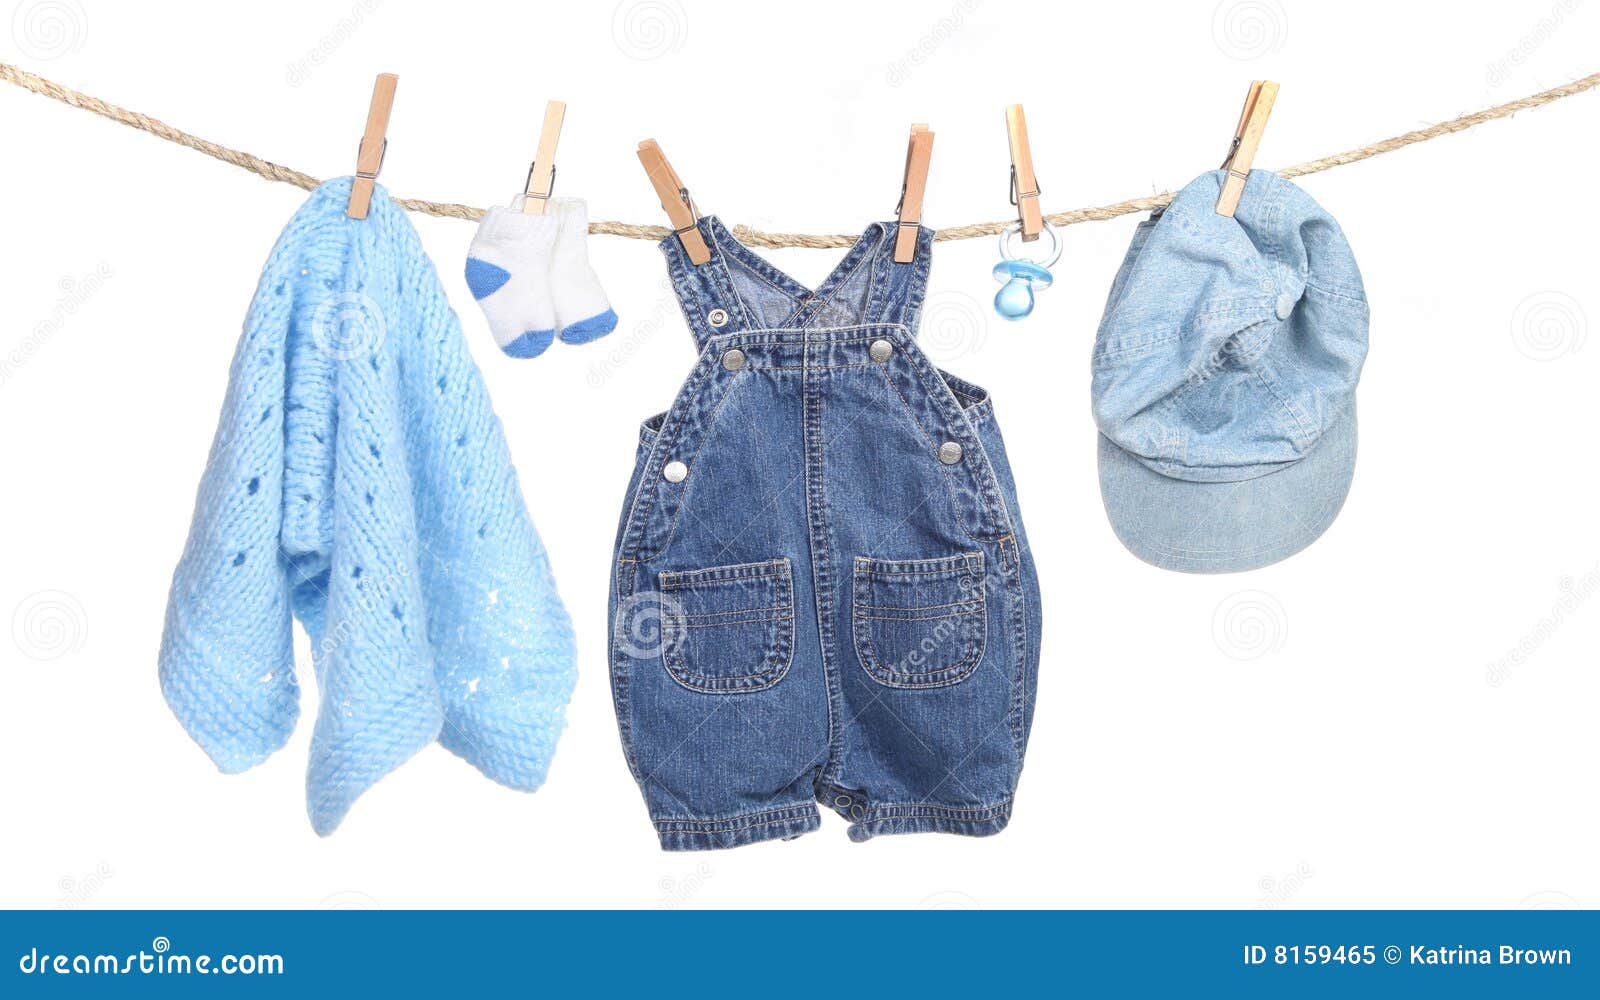 All Boy Clothing Hanging on a Clothesline Stock Image - Image of ...